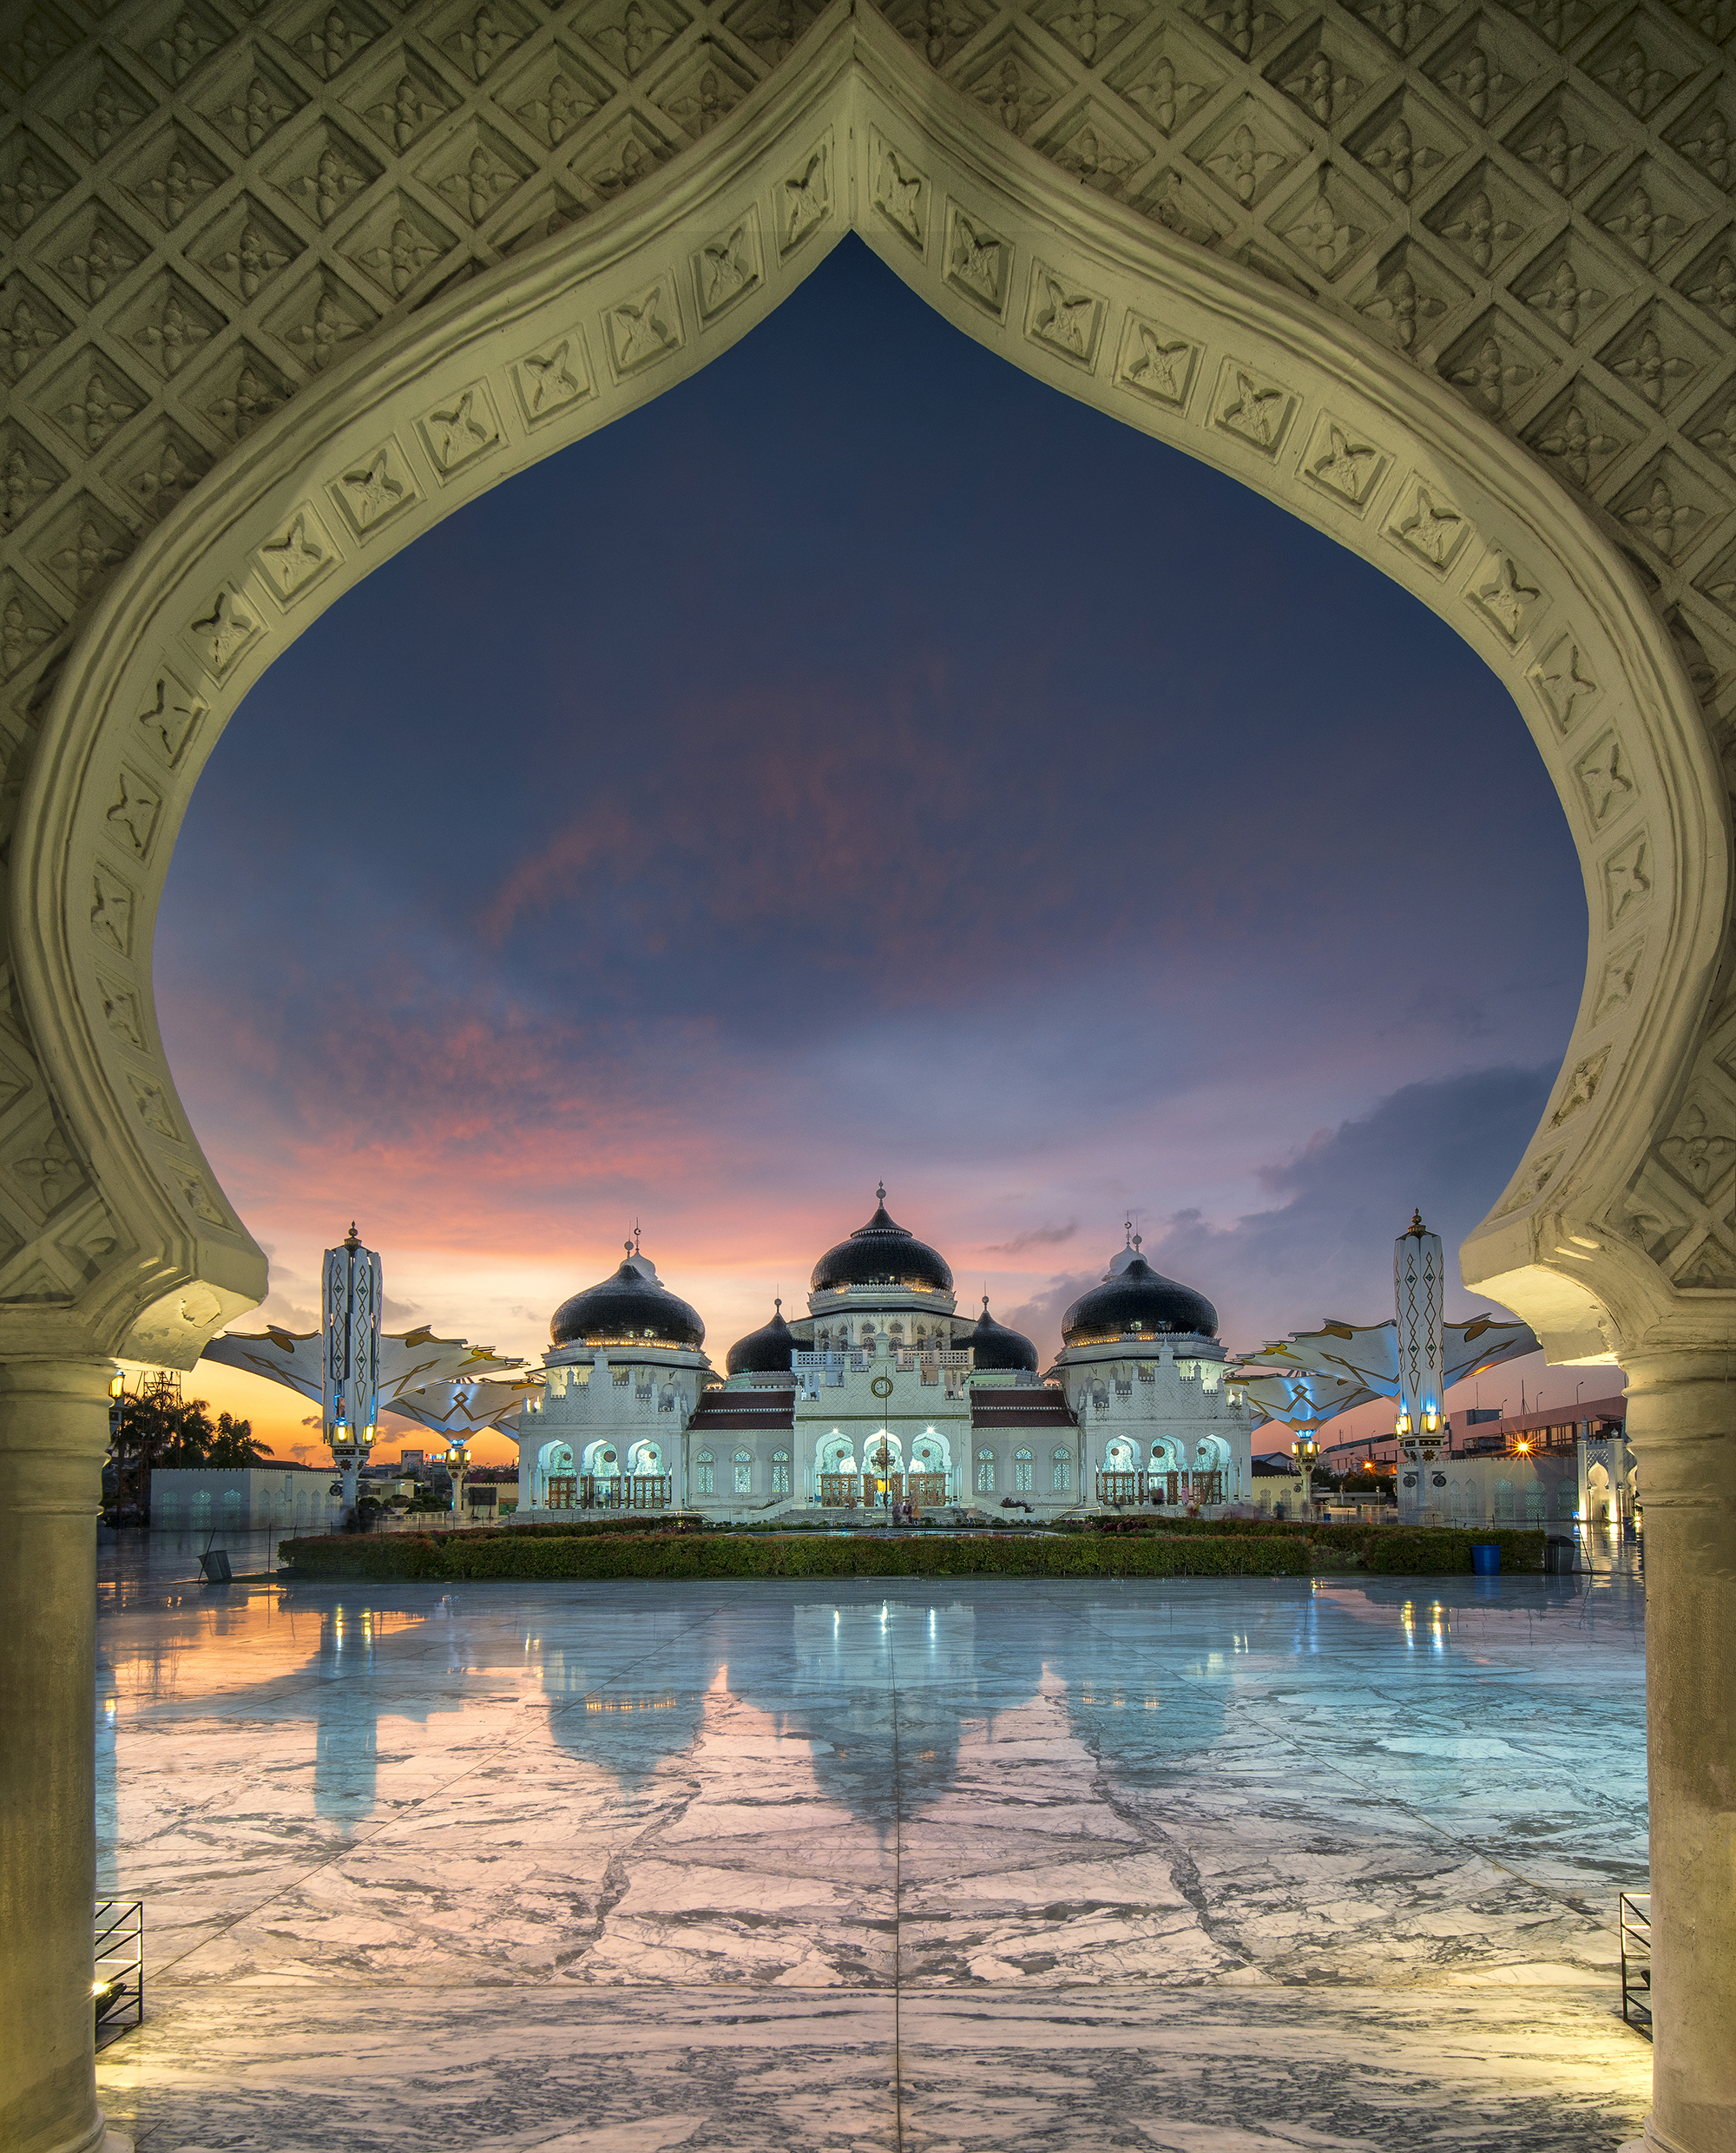 Baiturrahman Great Mosque in Banda Aceh is the witness of the 2004 Tsunami tragedy